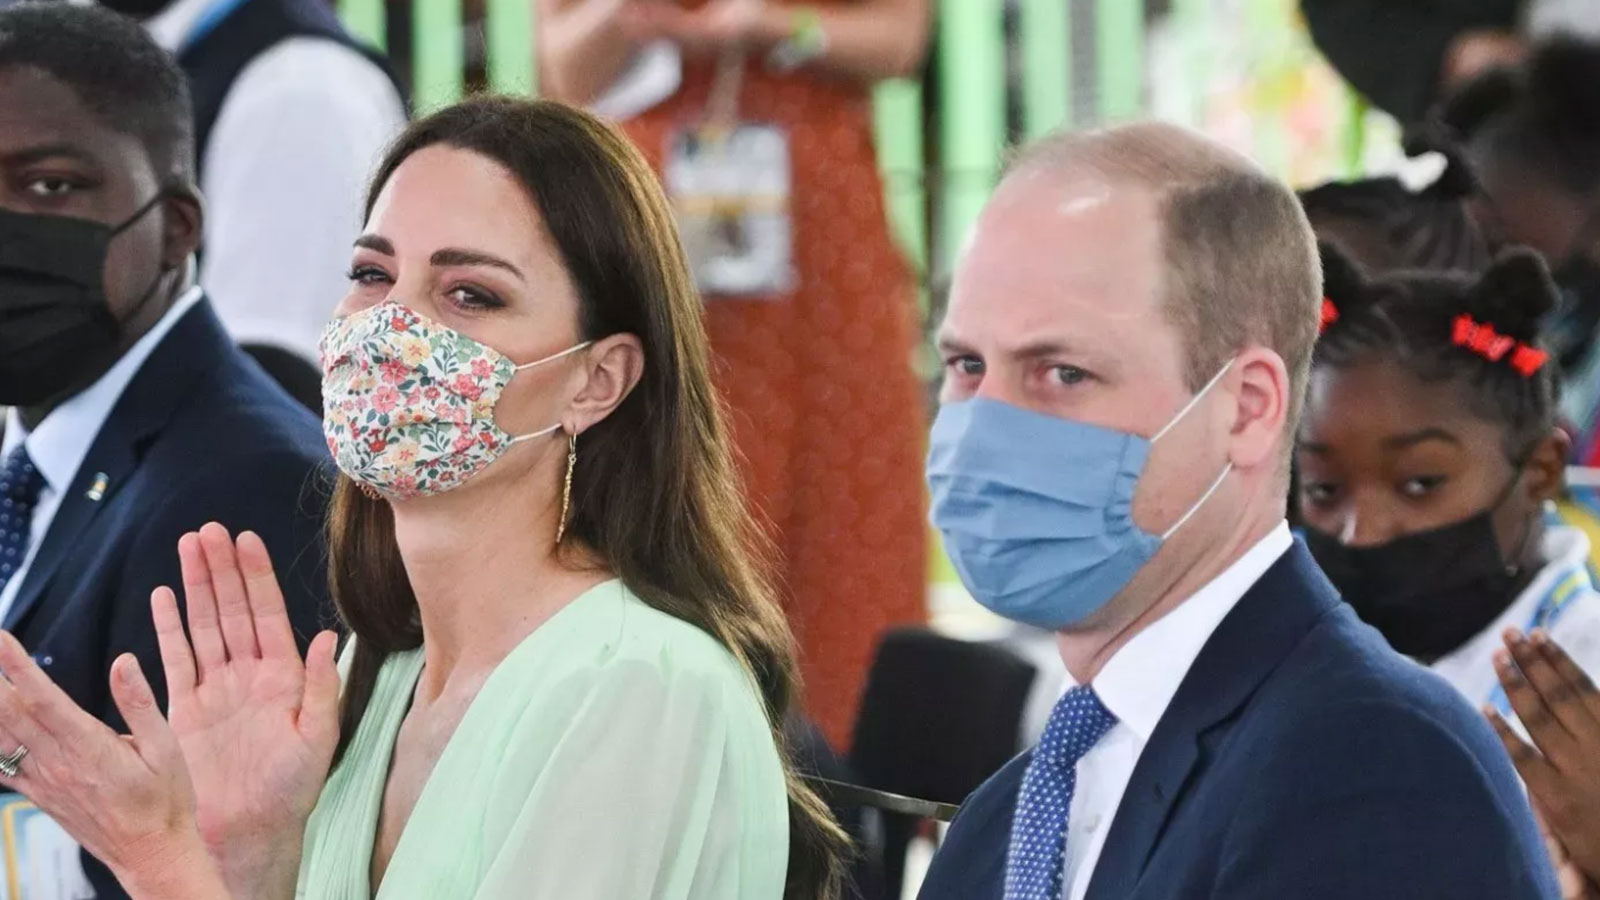 Prince William, Kate met with protesters in Bahamas demanding reparations